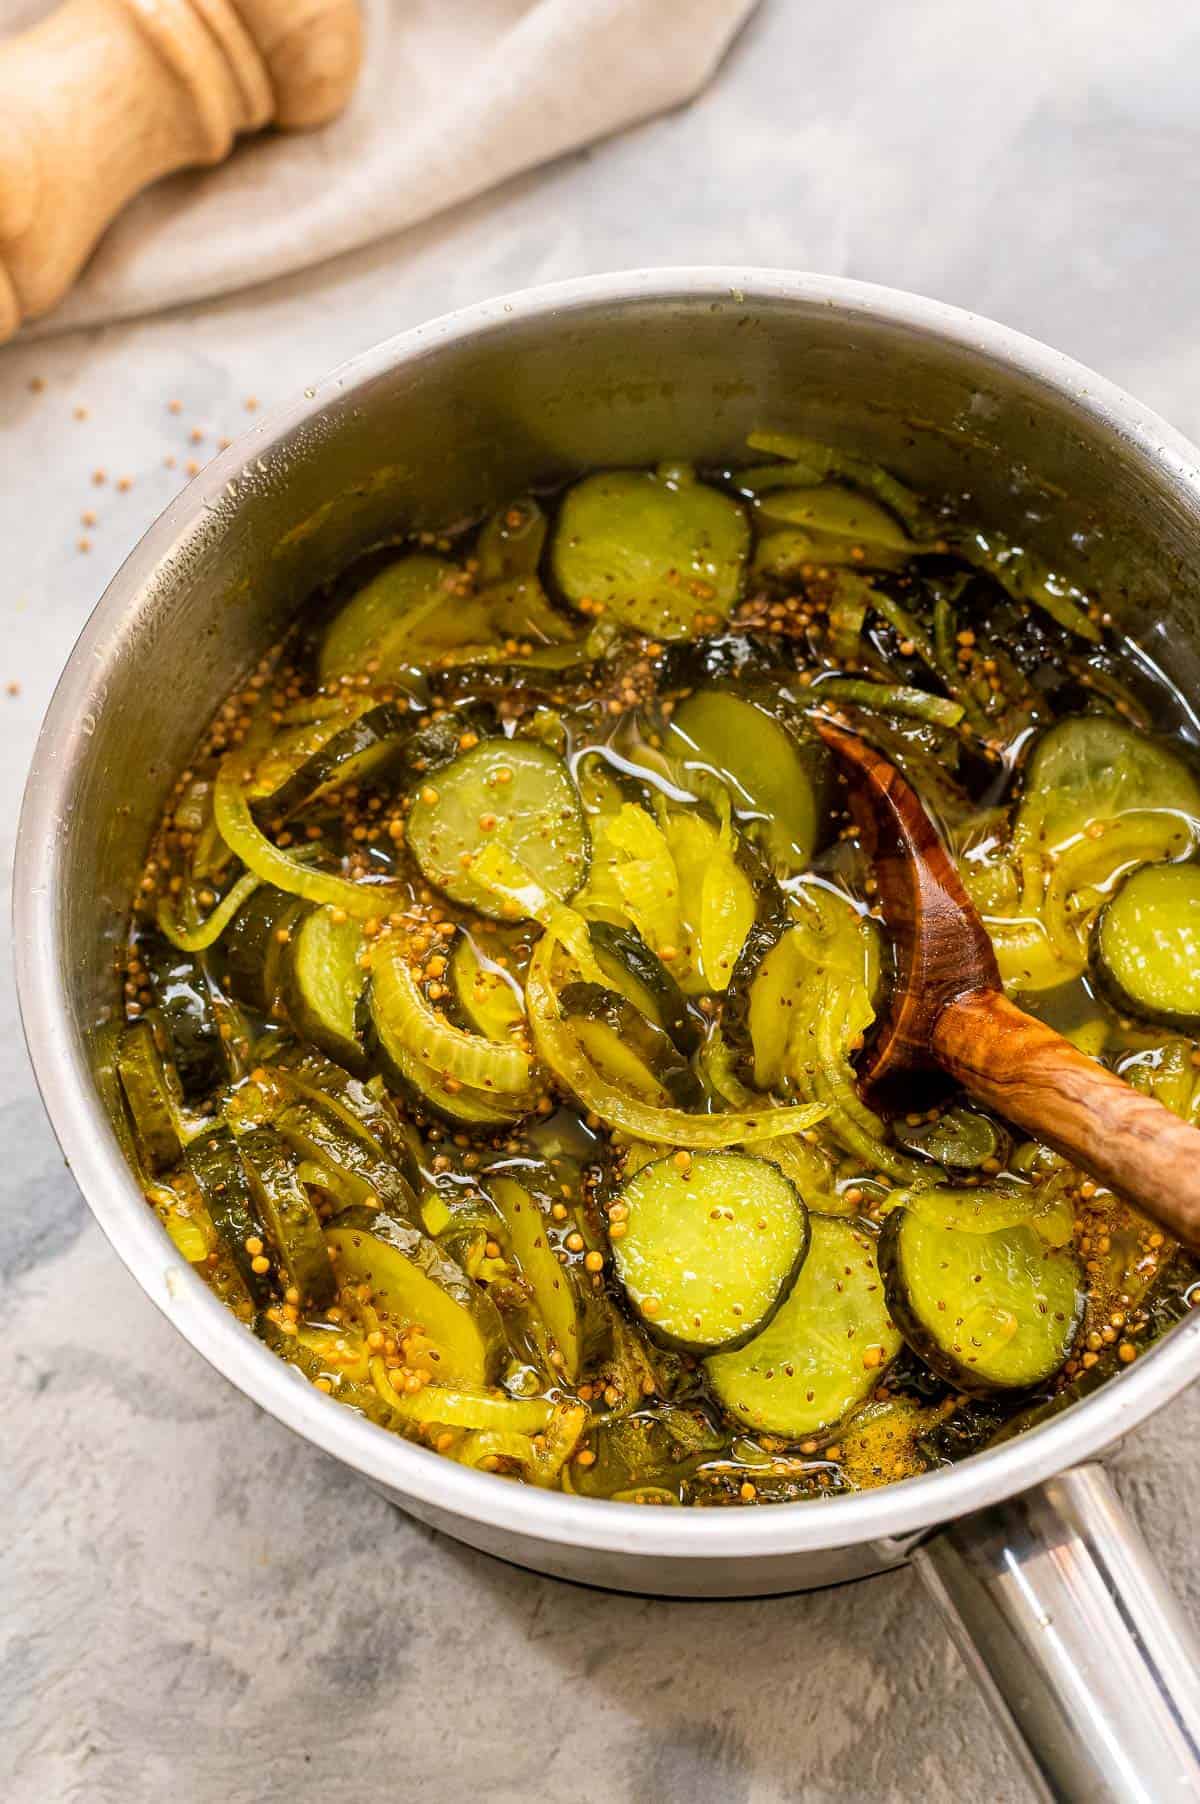 Saucepan with ingredients to make bread and butter pickles